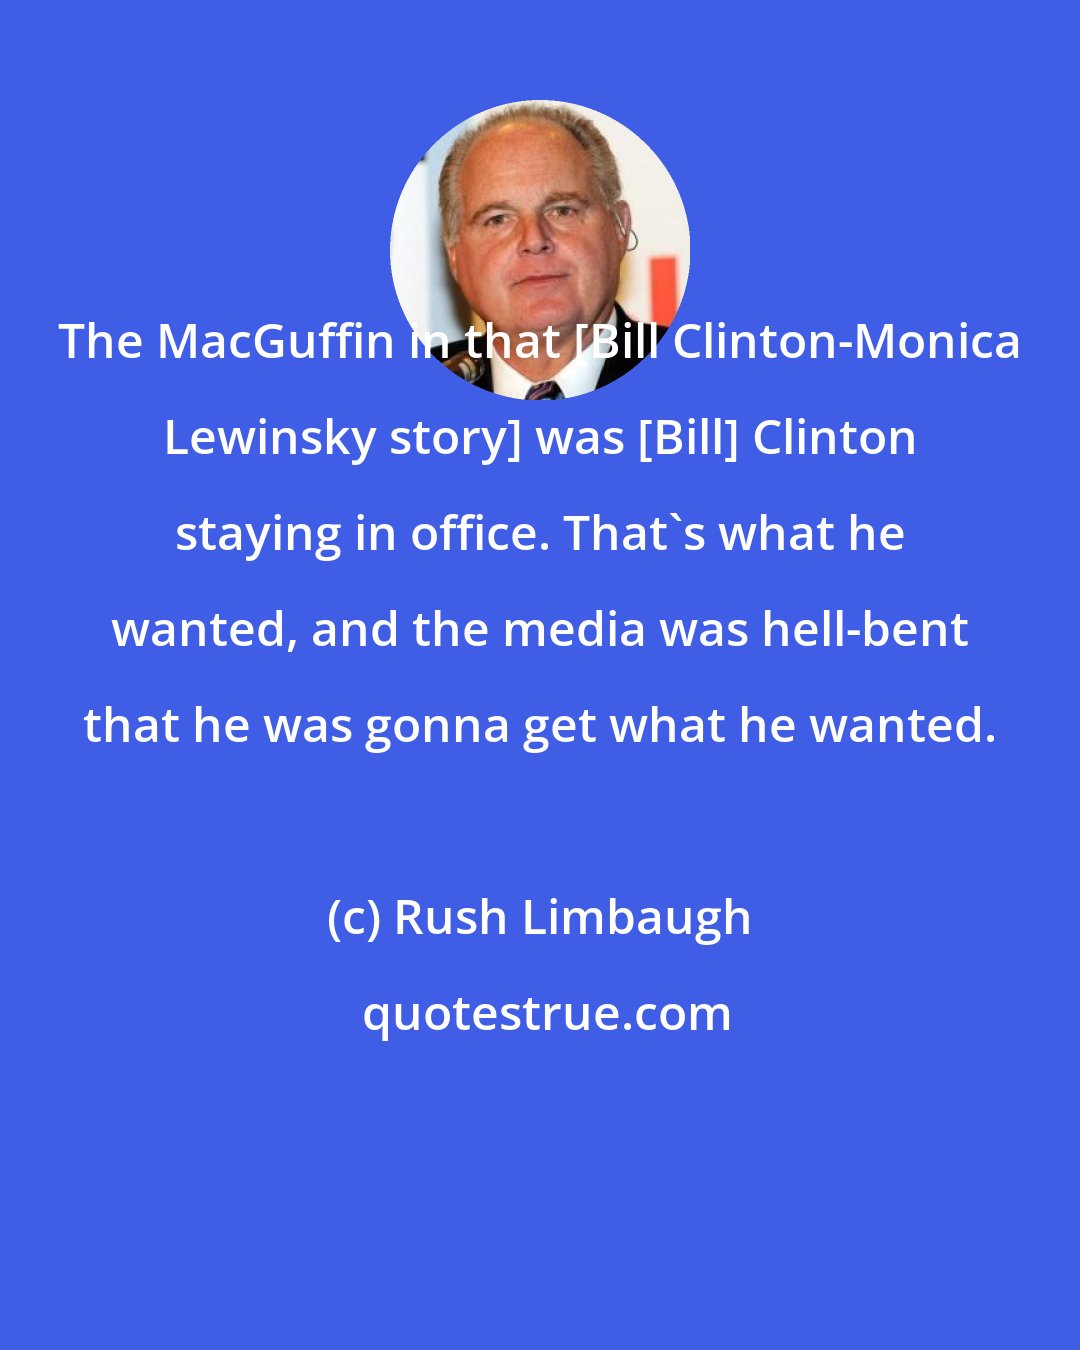 Rush Limbaugh: The MacGuffin in that [Bill Clinton-Monica Lewinsky story] was [Bill] Clinton staying in office. That's what he wanted, and the media was hell-bent that he was gonna get what he wanted.